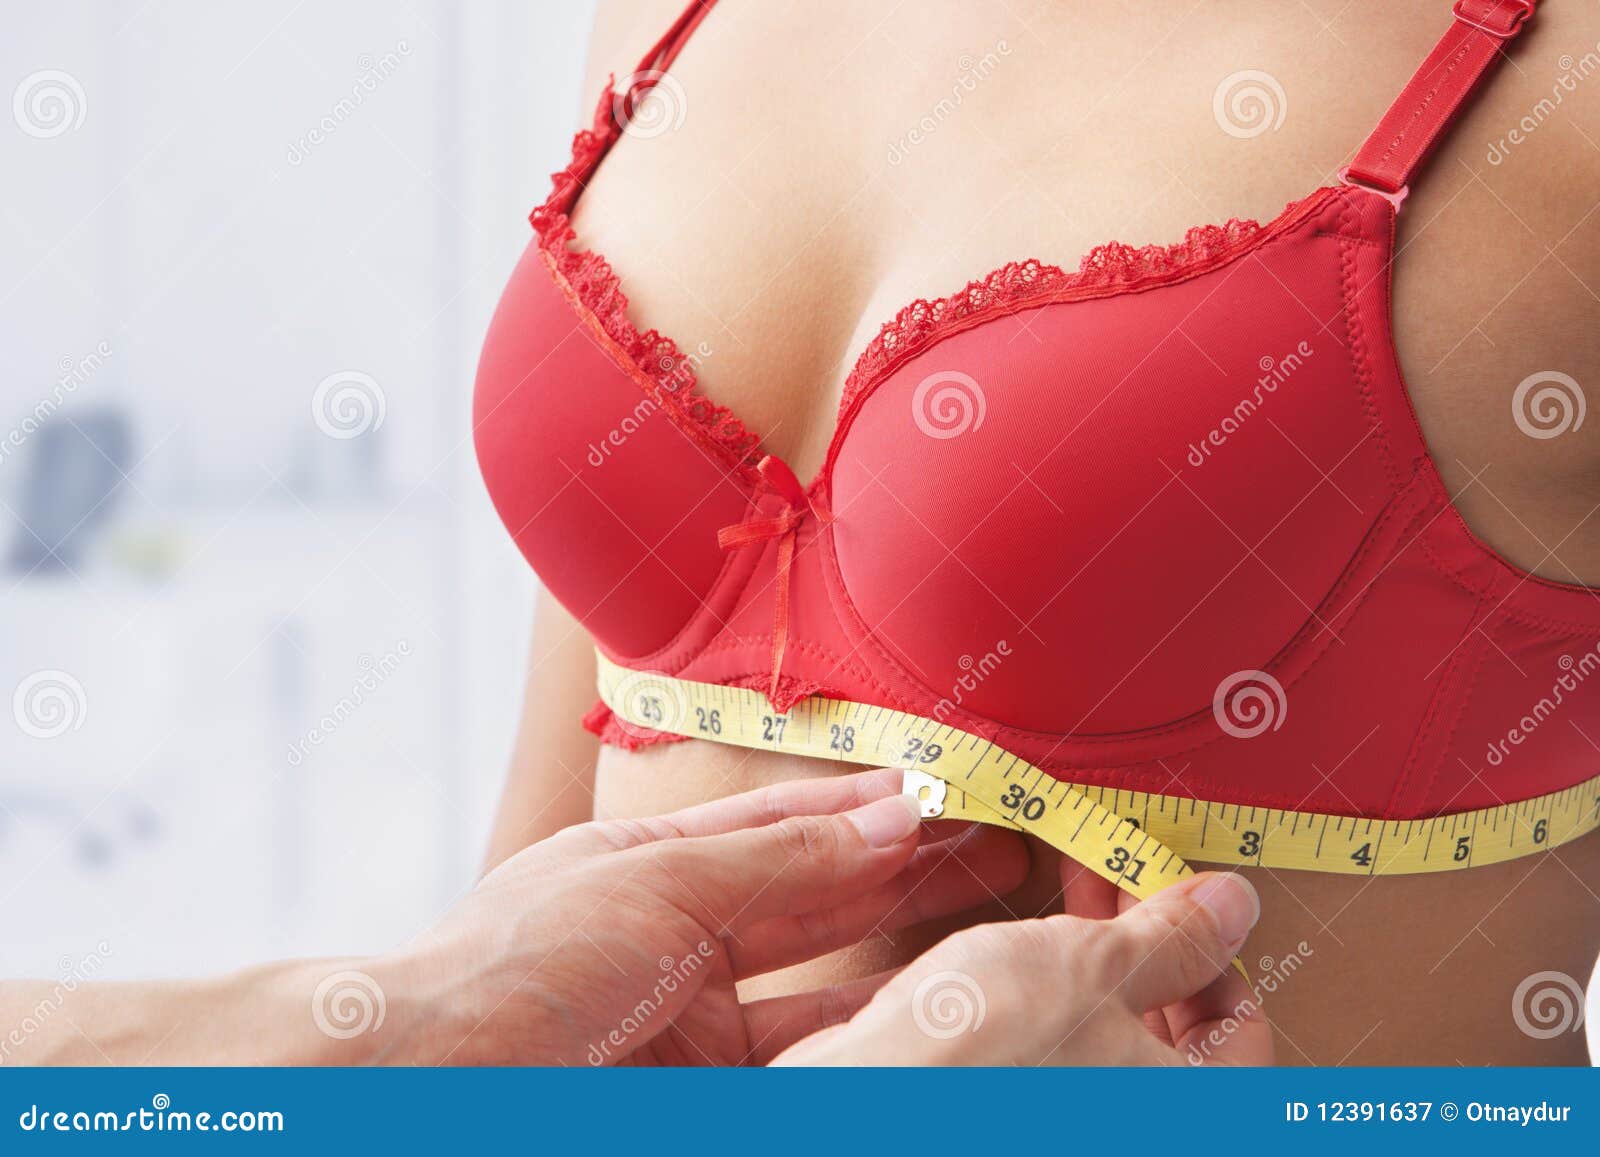 Bra, boobs and tape with woman measuring for weight loss, health and diet  for bust size. Plastic su Stock Photo by YuriArcursPeopleimages